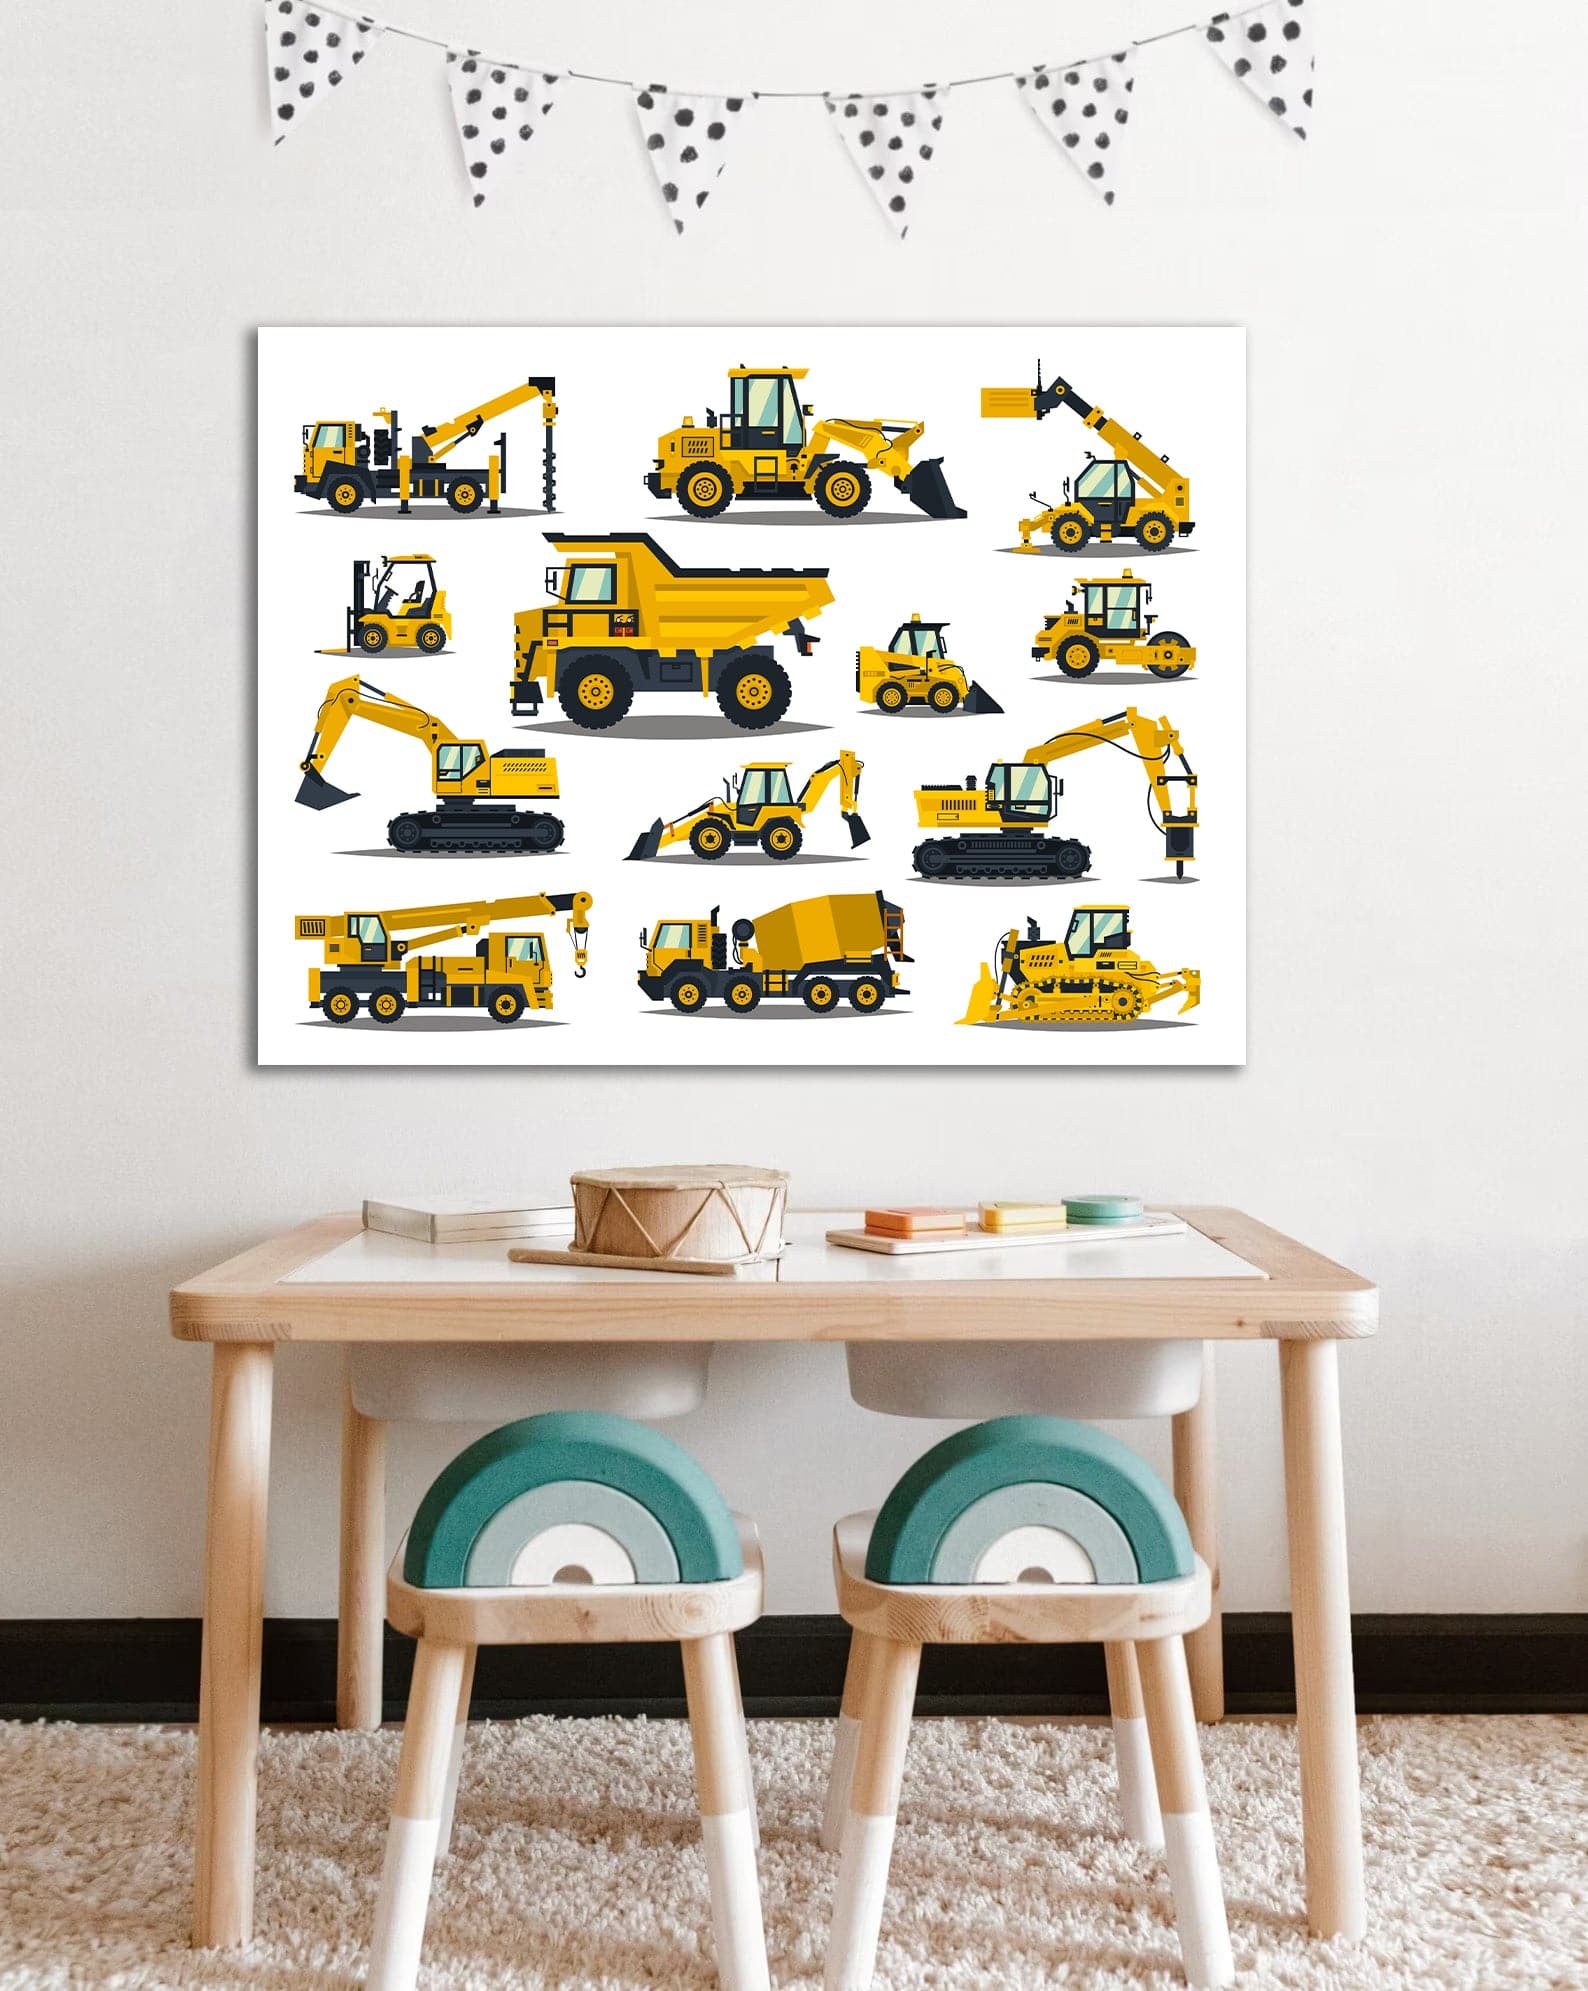 Framed 1 Panel  - Kids Room - Cute Constructions Vehicles